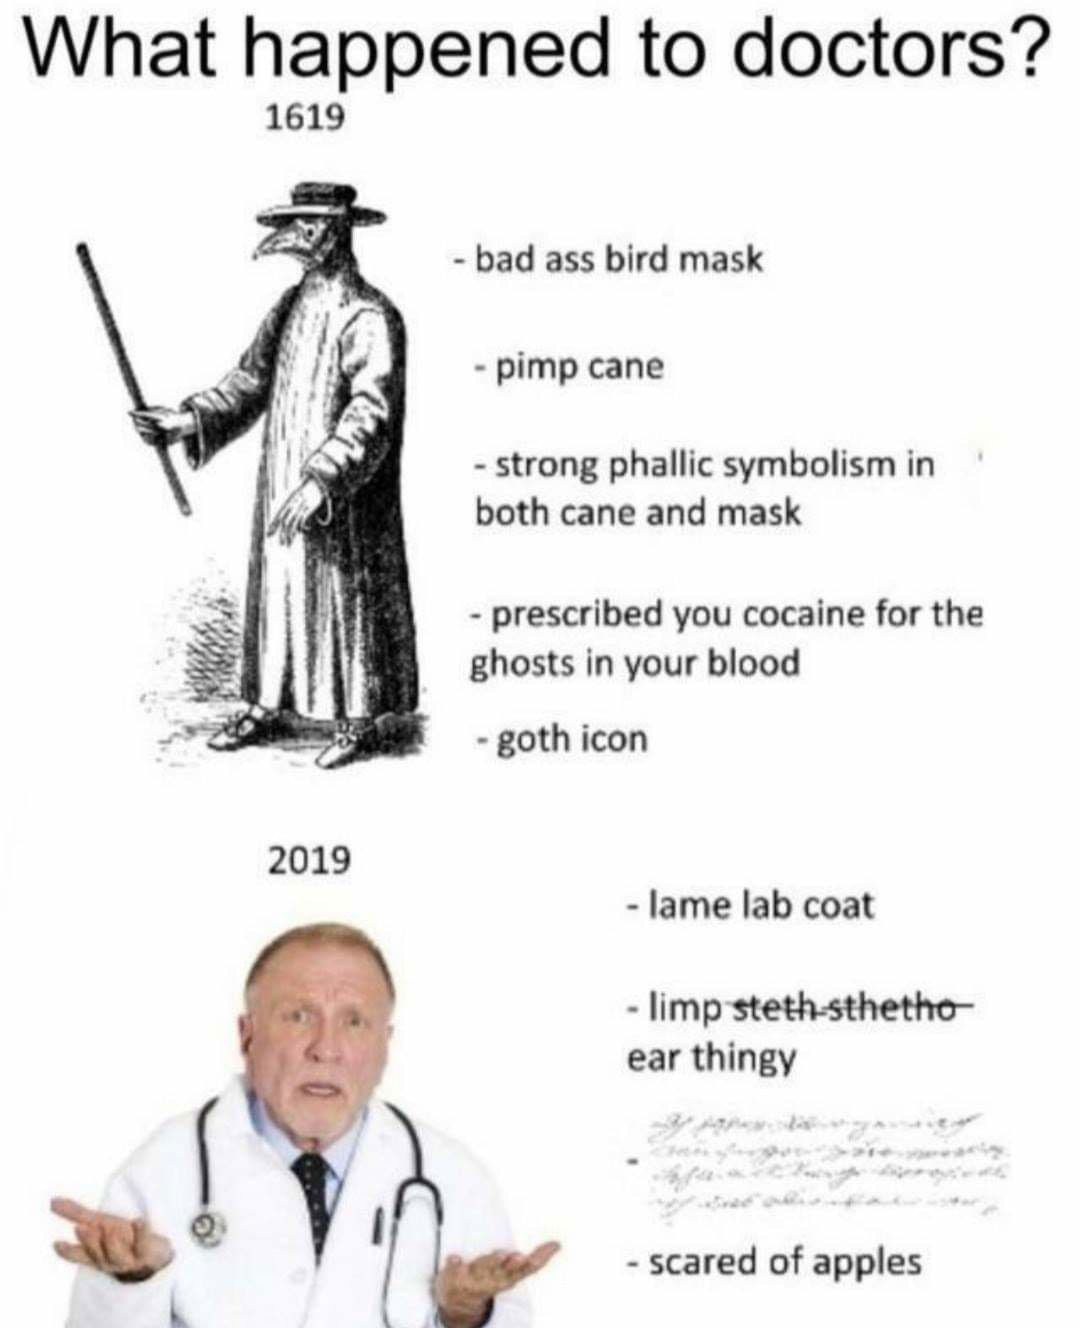 ghosts in your blood meme - What happened to doctors? 1619 bad ass bird mask pimp cane strong phallic symbolism in both cane and mask prescribed you cocaine for the ghosts in your blood goth icon 2019 lame lab coat limp stethsthetho ear thingy scared of a